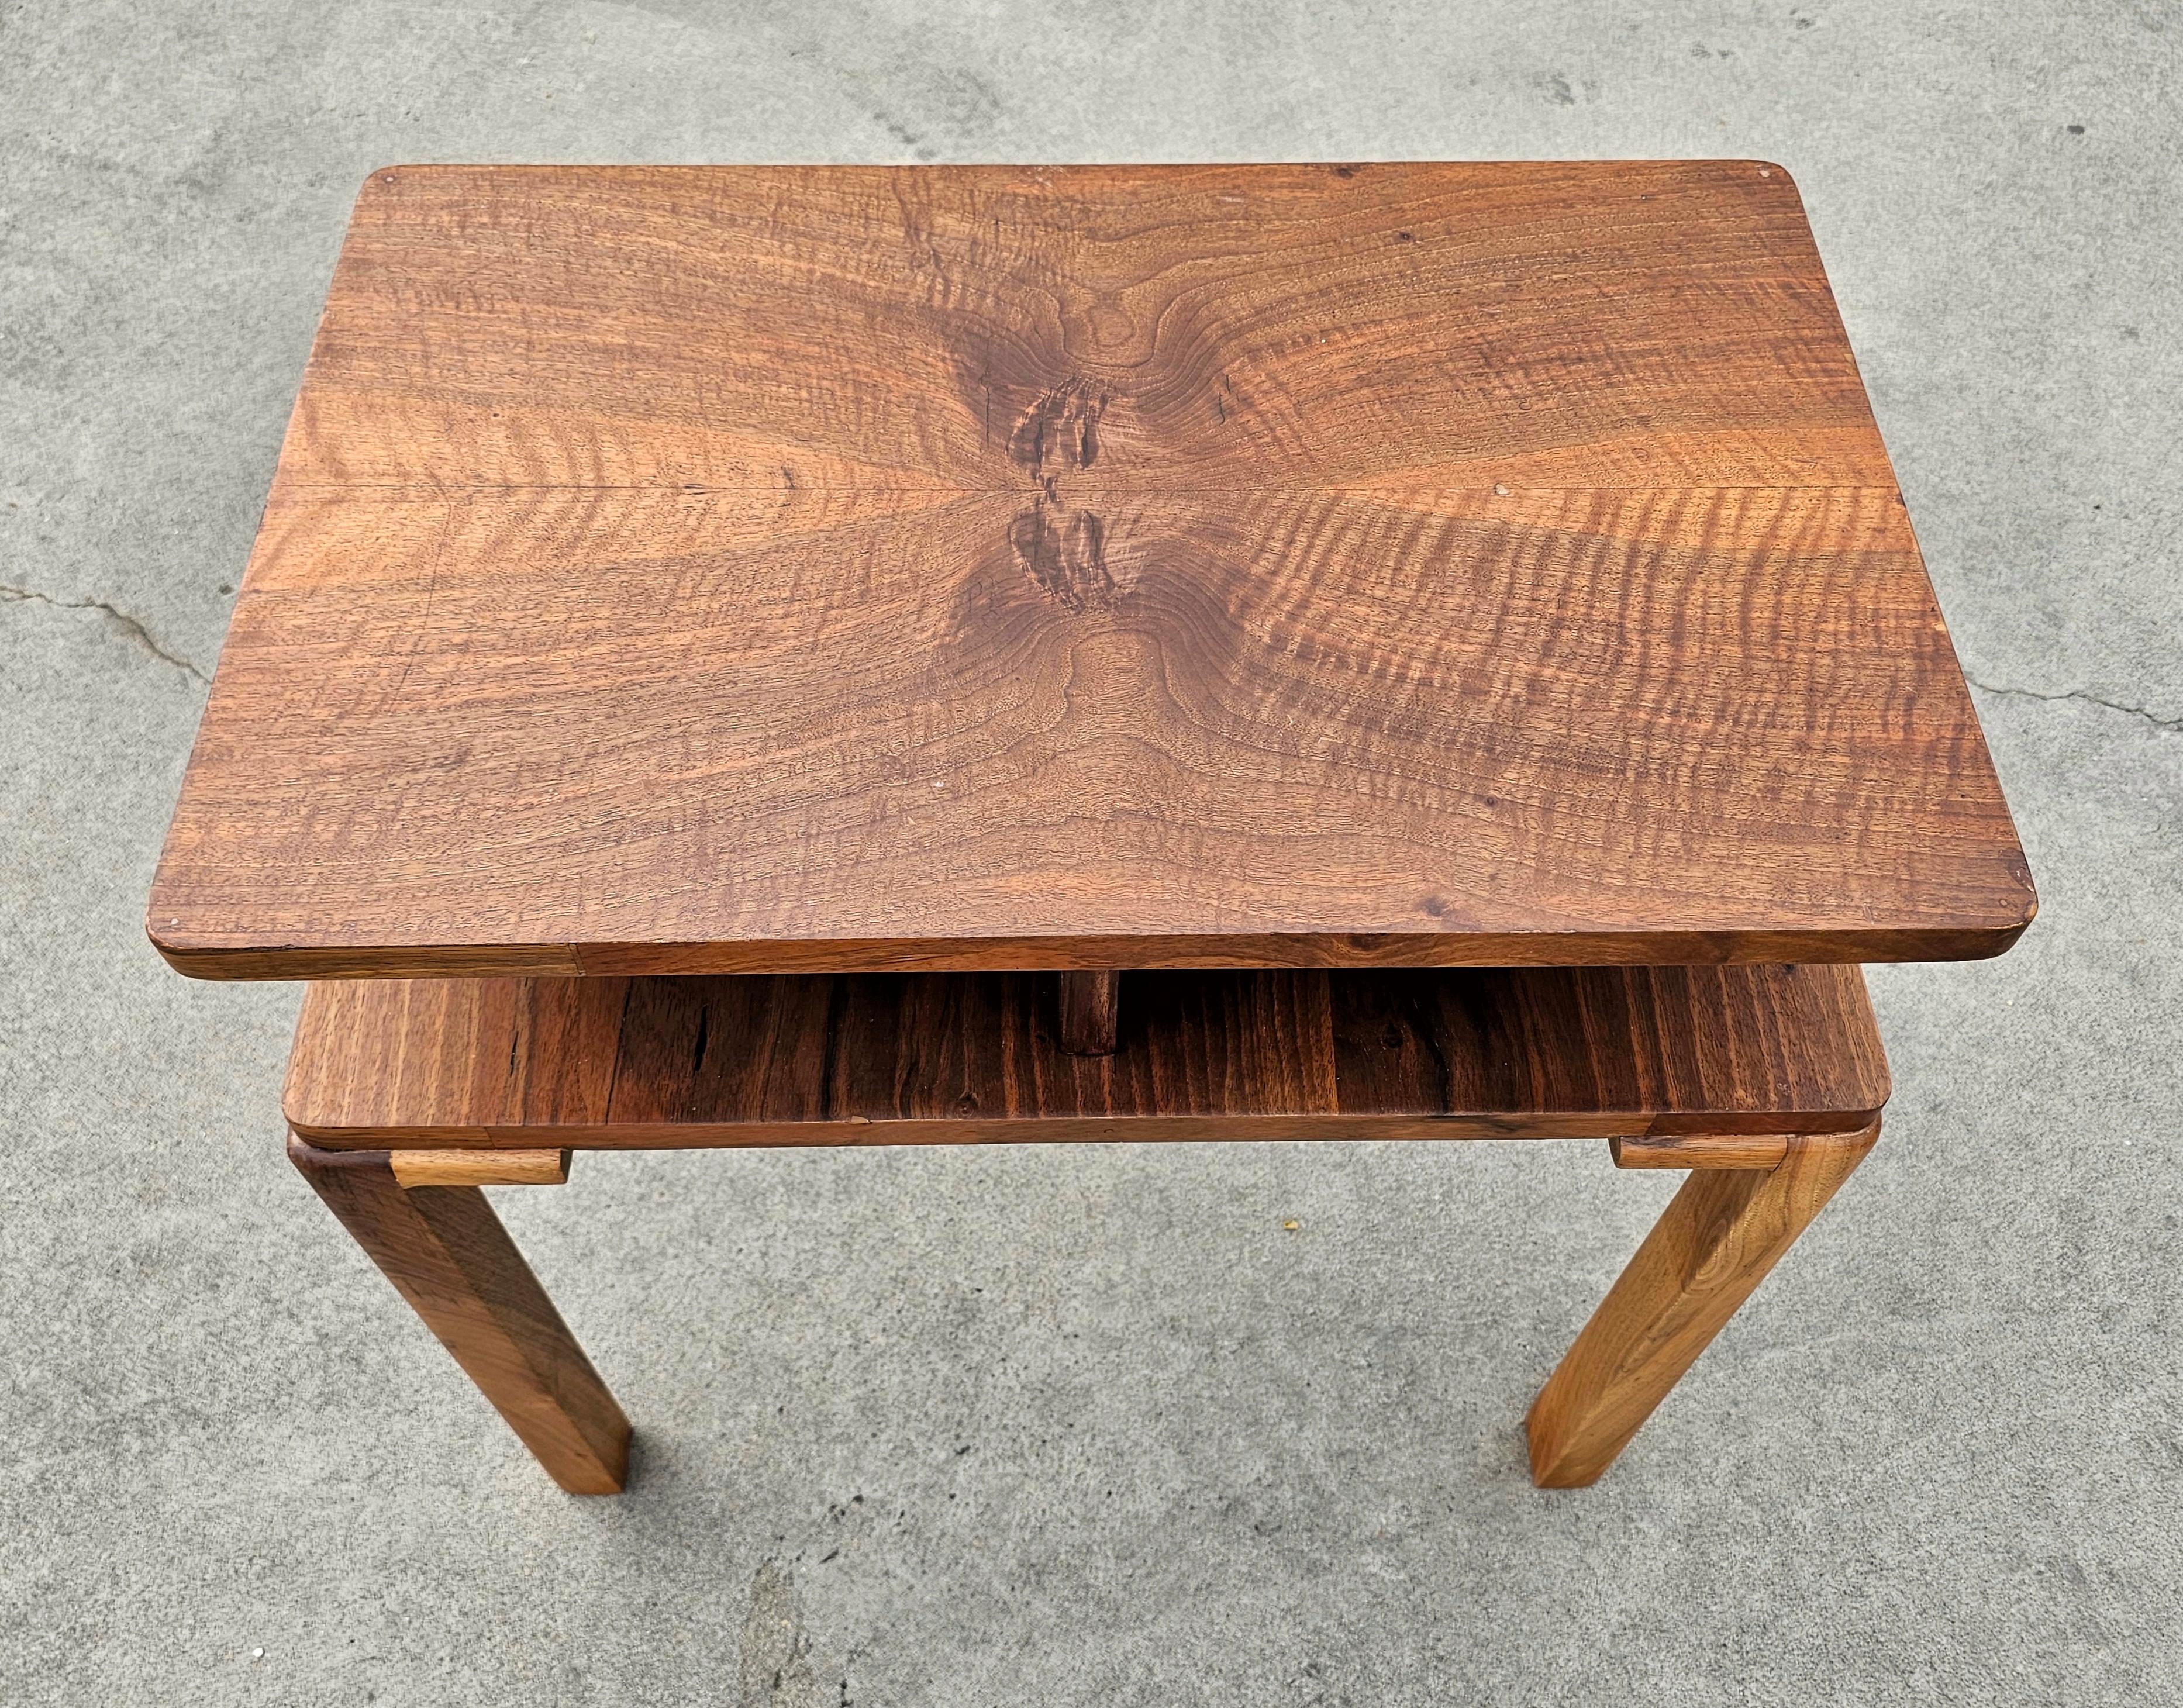 Rectangular Two Tiered Art Deco Walnut Side Table, Austria 1930s For Sale 3